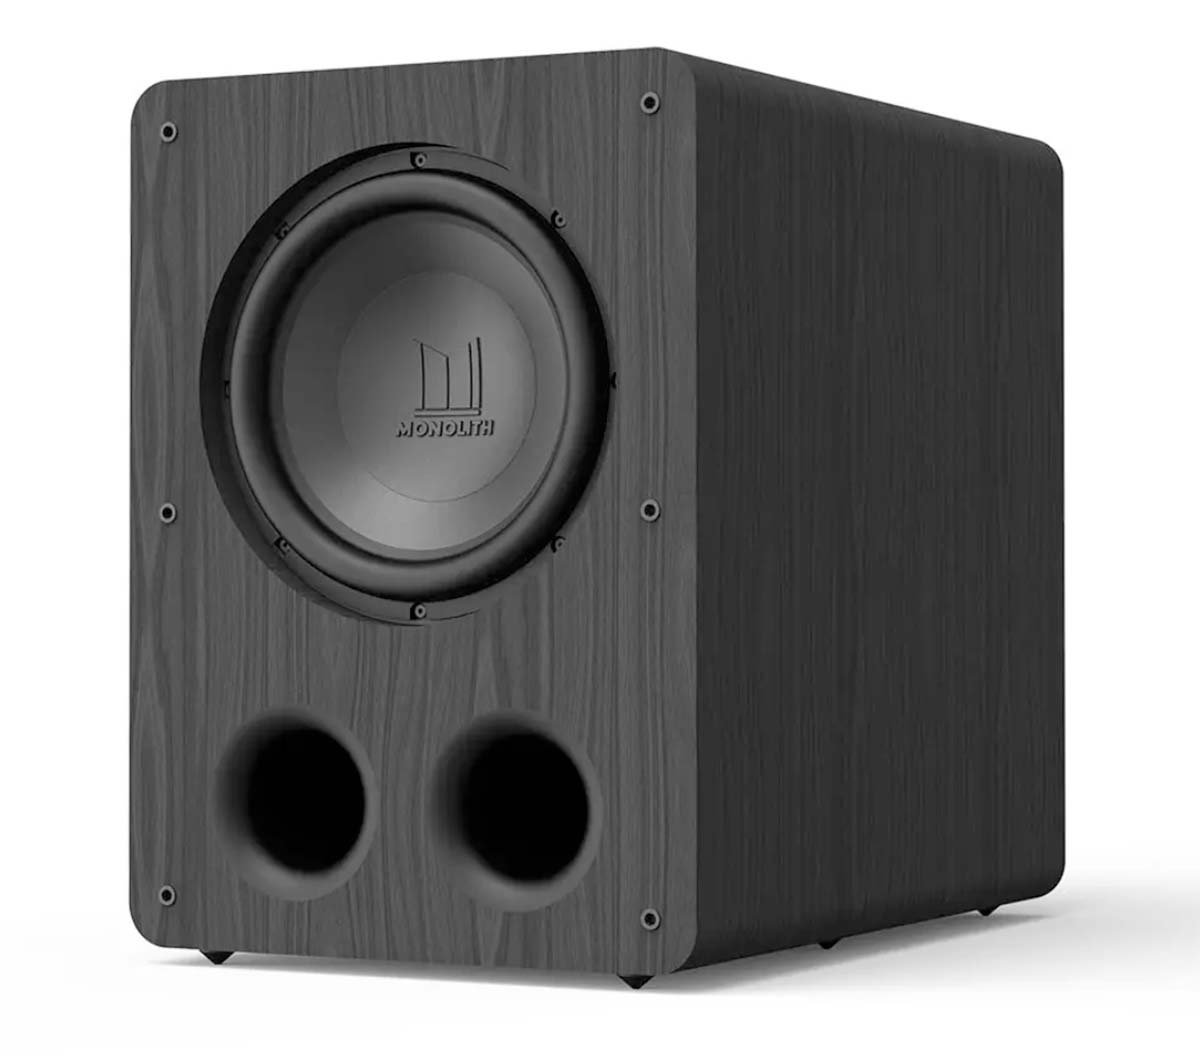 Looking for a new sub? Got less than a grand in your budget? Home Theater Review is here to help you sort through some great options. 82cf9d5e monolith 12